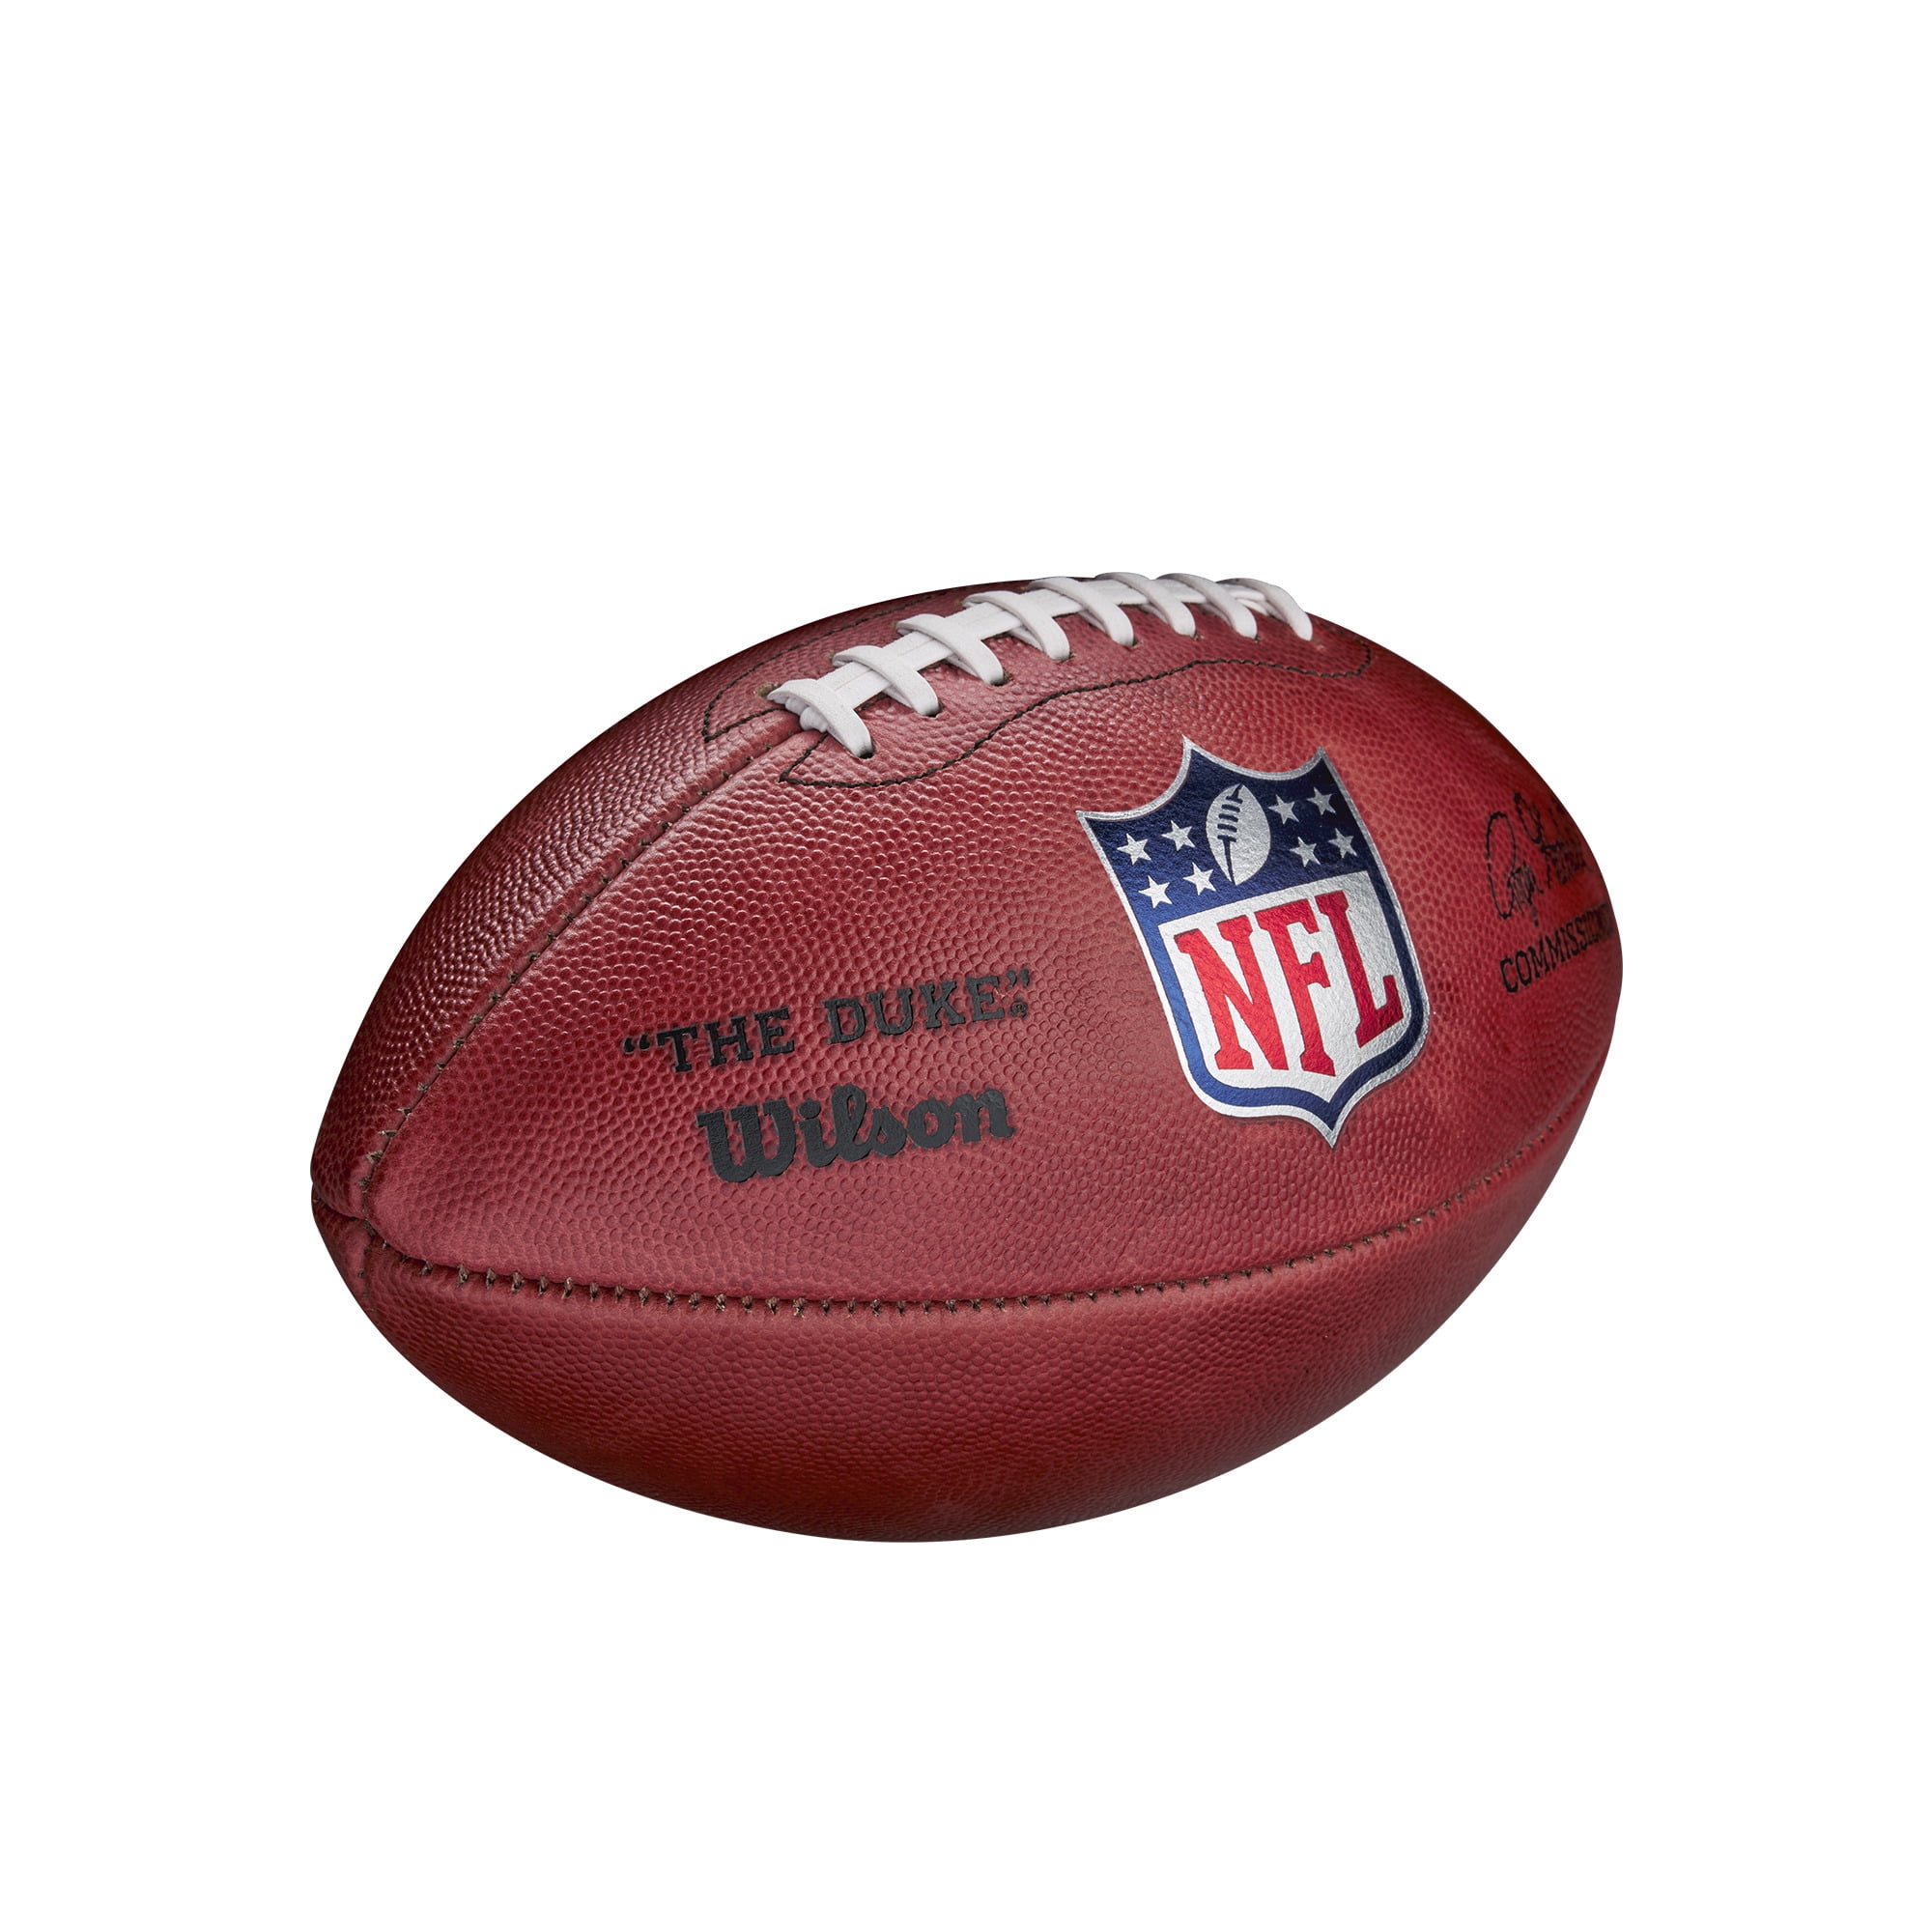  Wilson “The Duke” NFL Official Authentic Leather Game